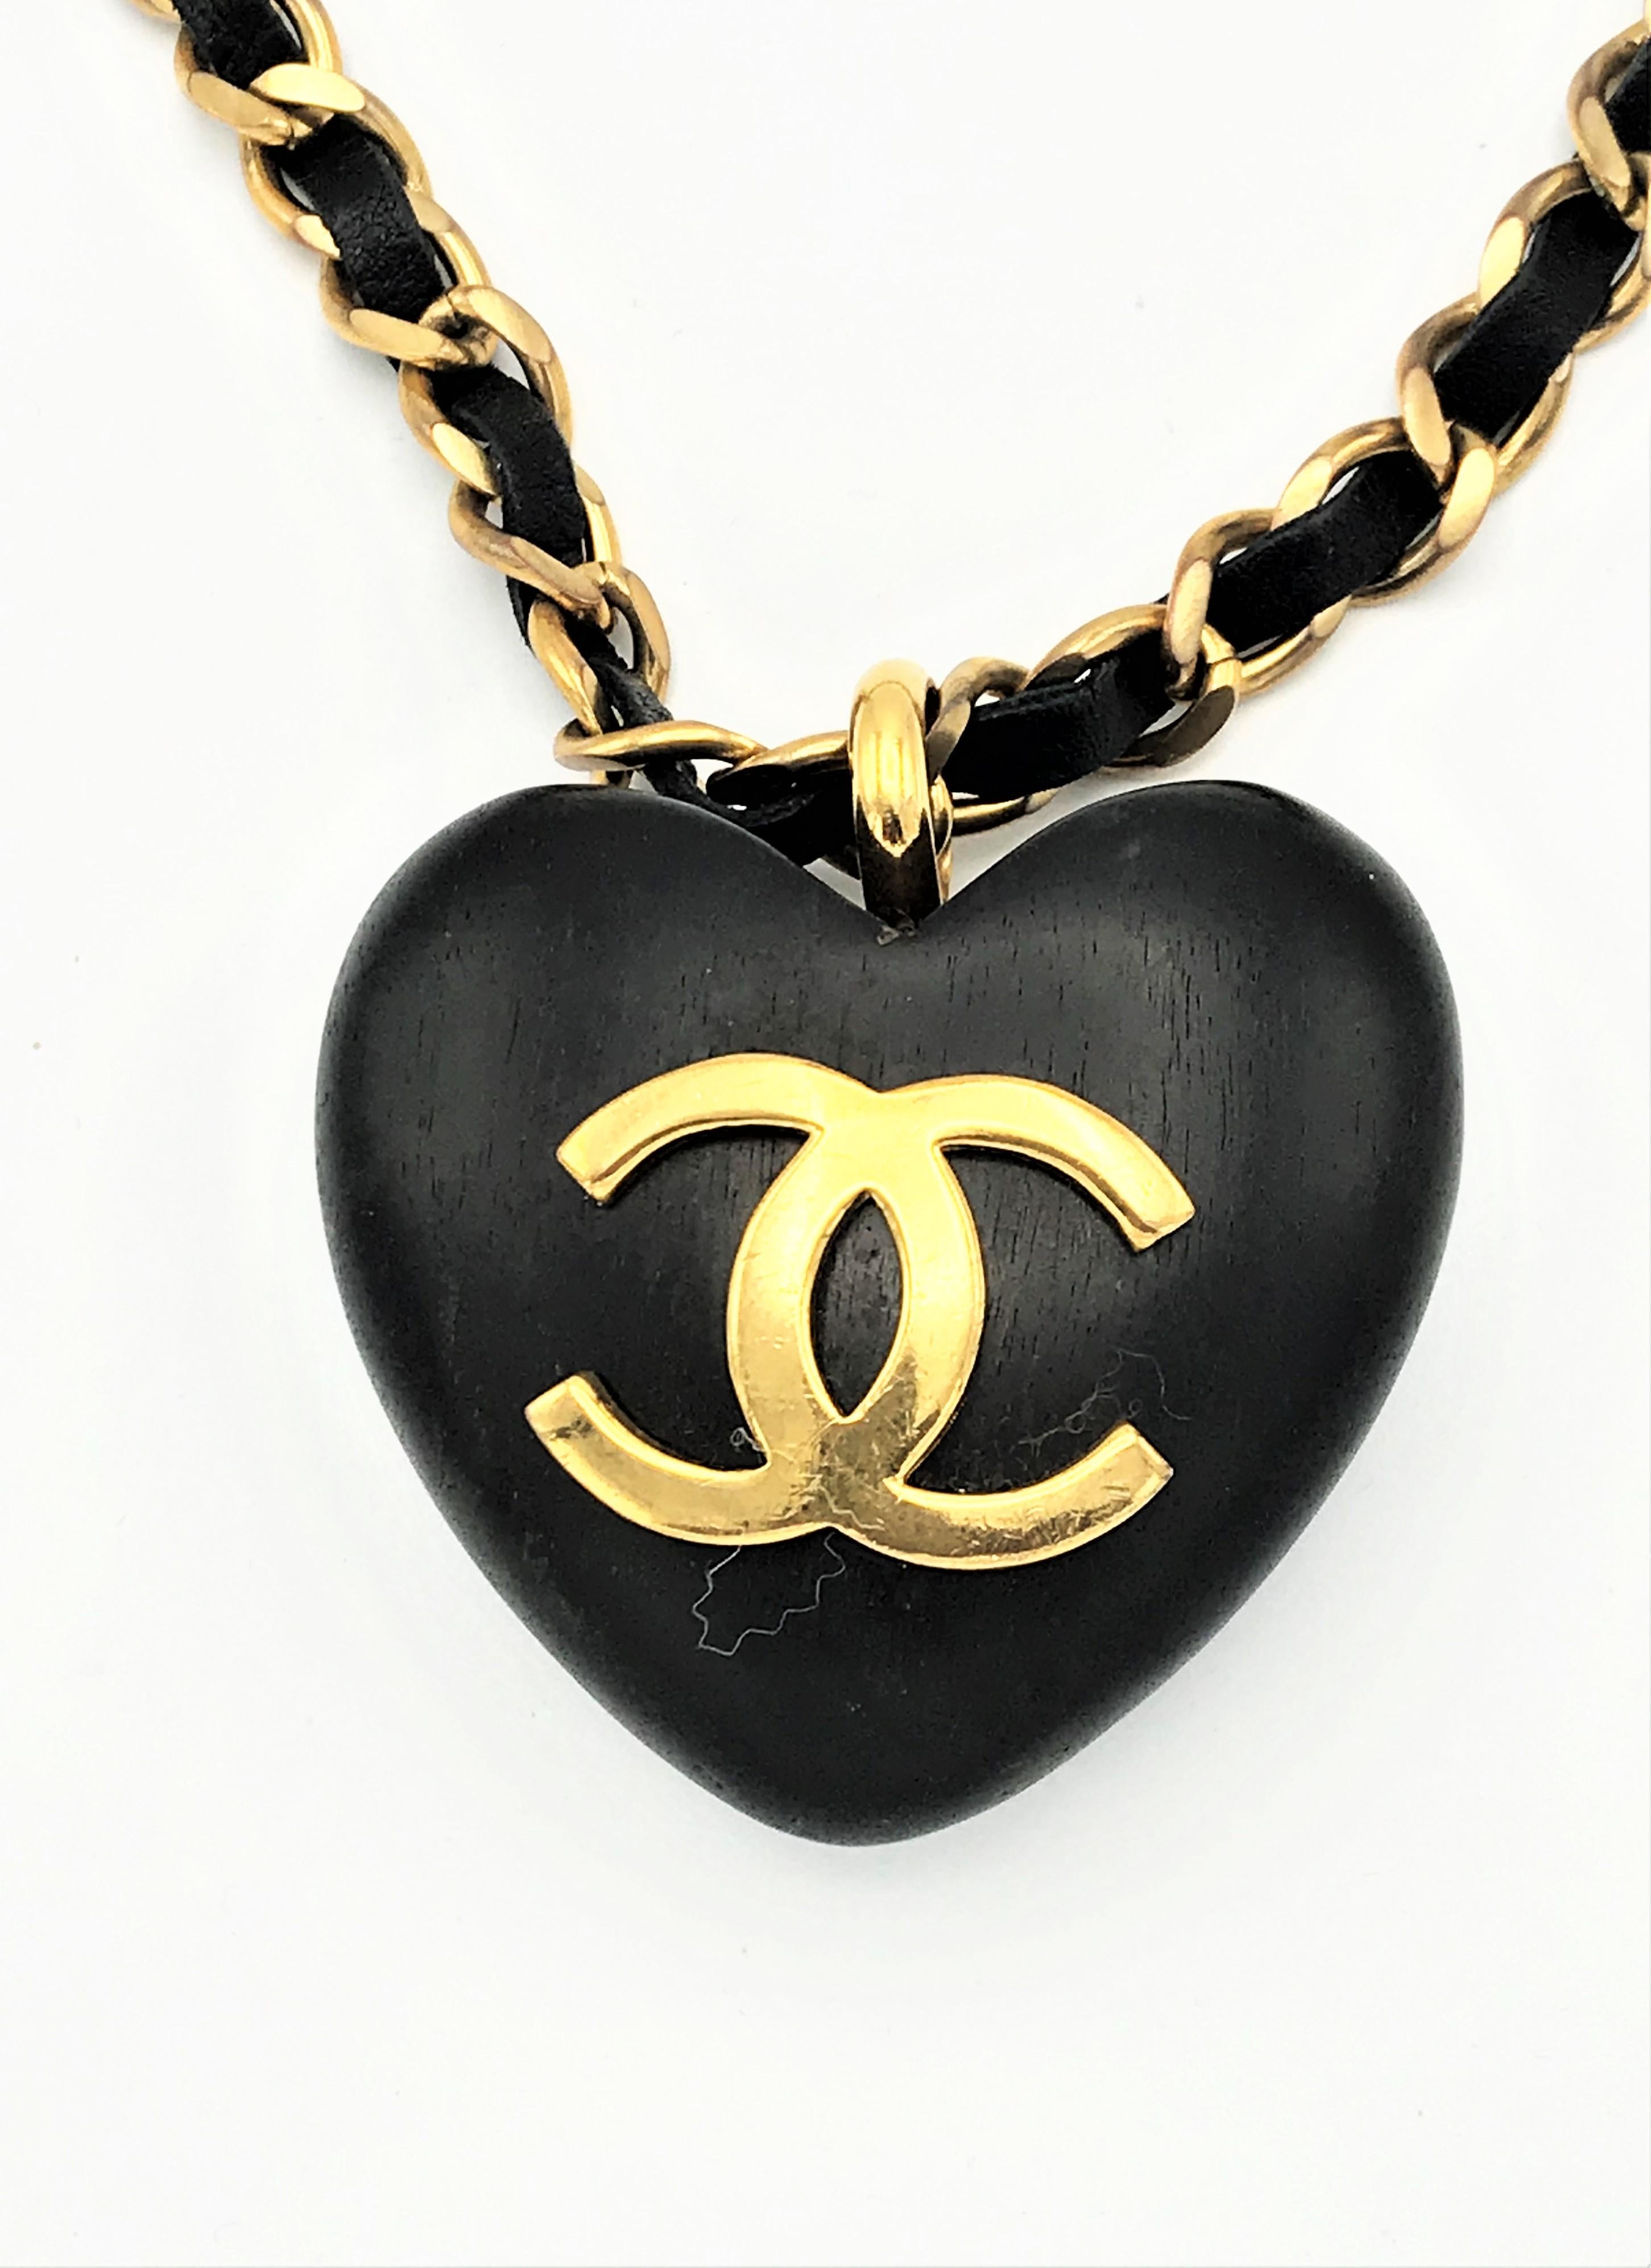 A very ICONIC Ebony Heart hanging on the iconic chain covered with leather. It is designed by Victoire de Castellane 2CC8 = 1990  
The plastic 1,5 cm thick heart pendant is decorated with the gold CHANEL logo and hangs on a 76 cm long chain. It is